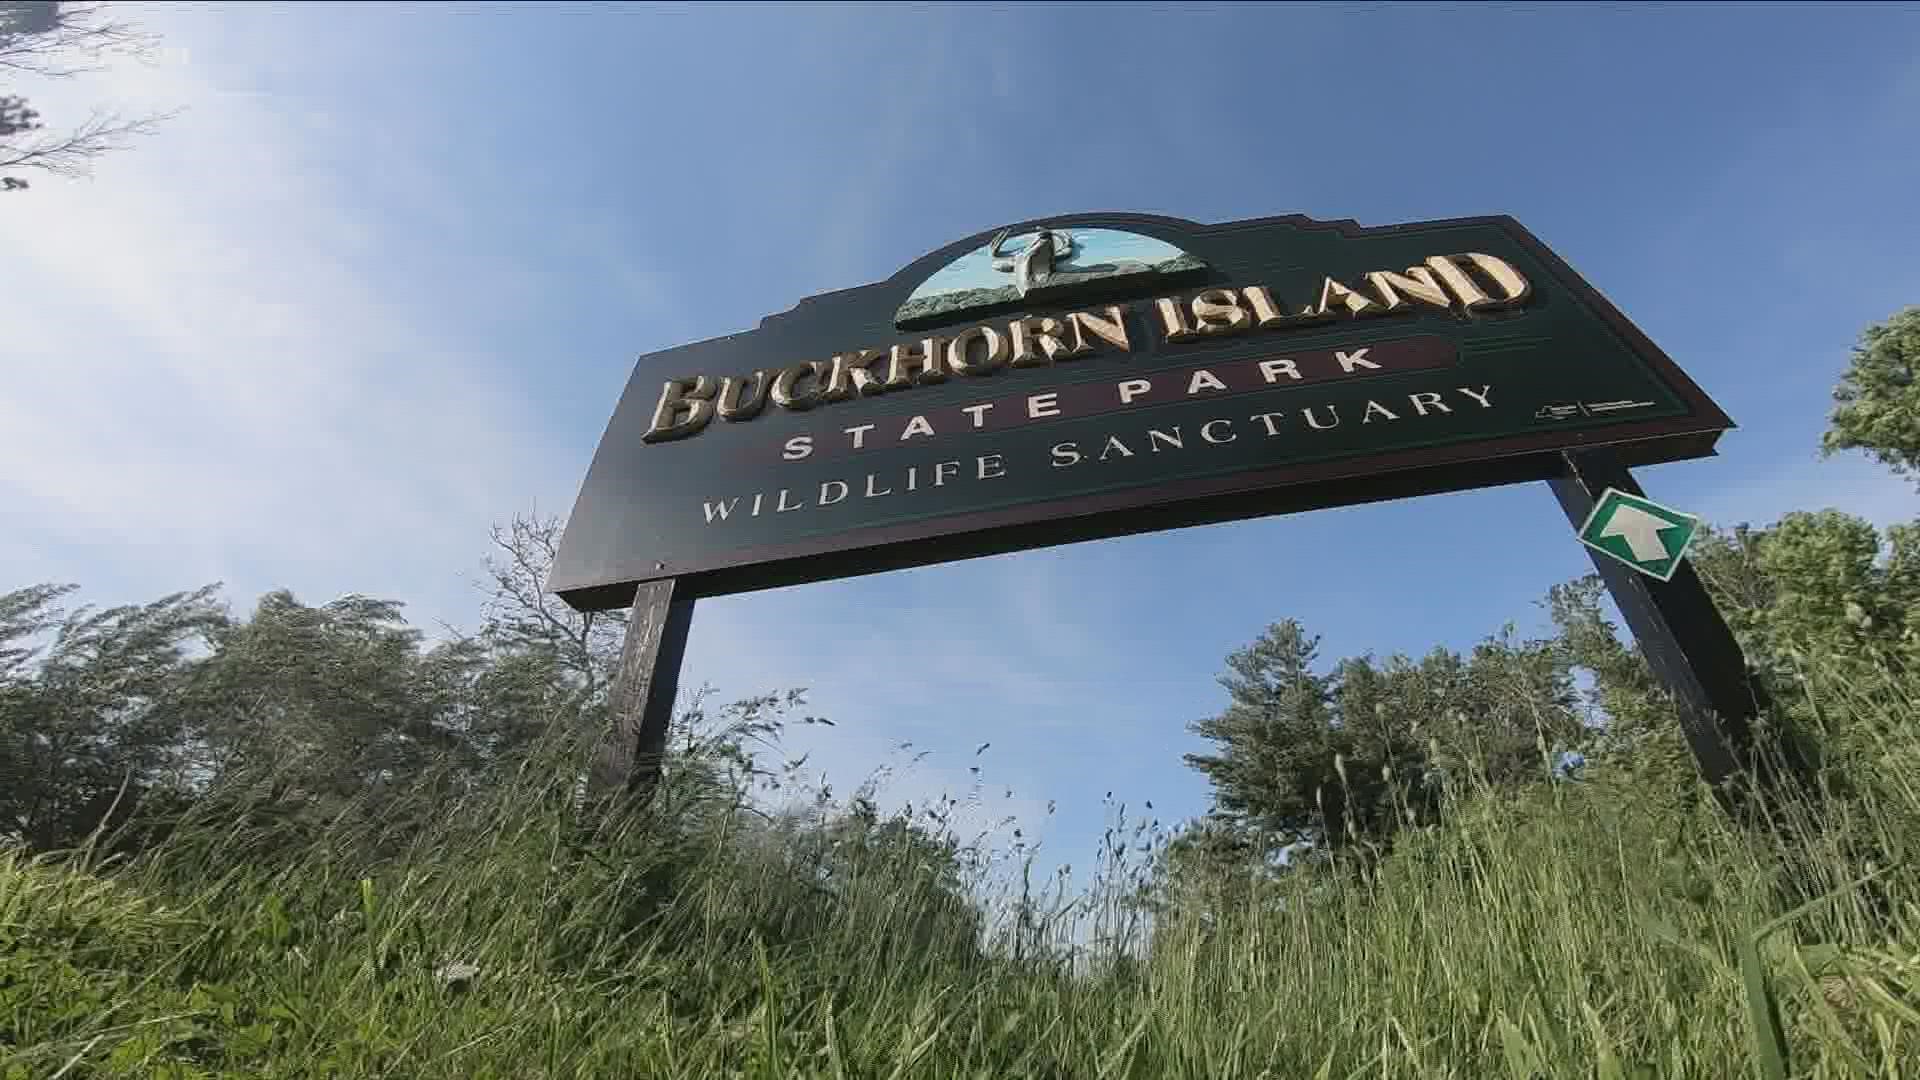 A chance to explore and learn at Buckhorn Island State Park in Grand Island.